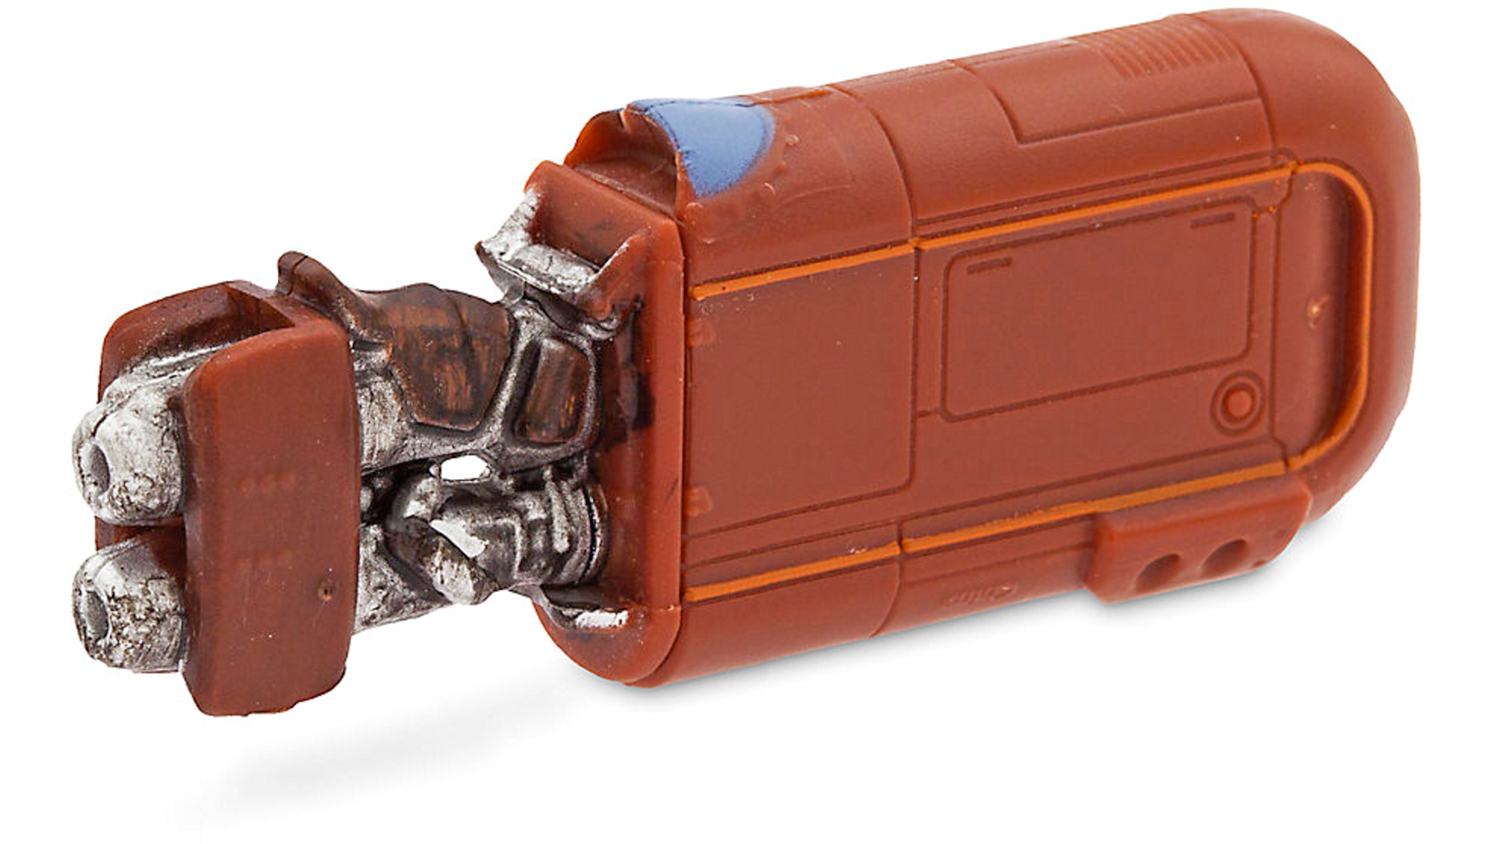 Who Decided To Only Put 4GB Of Storage In This Rey’s Speeder Flash Drive?